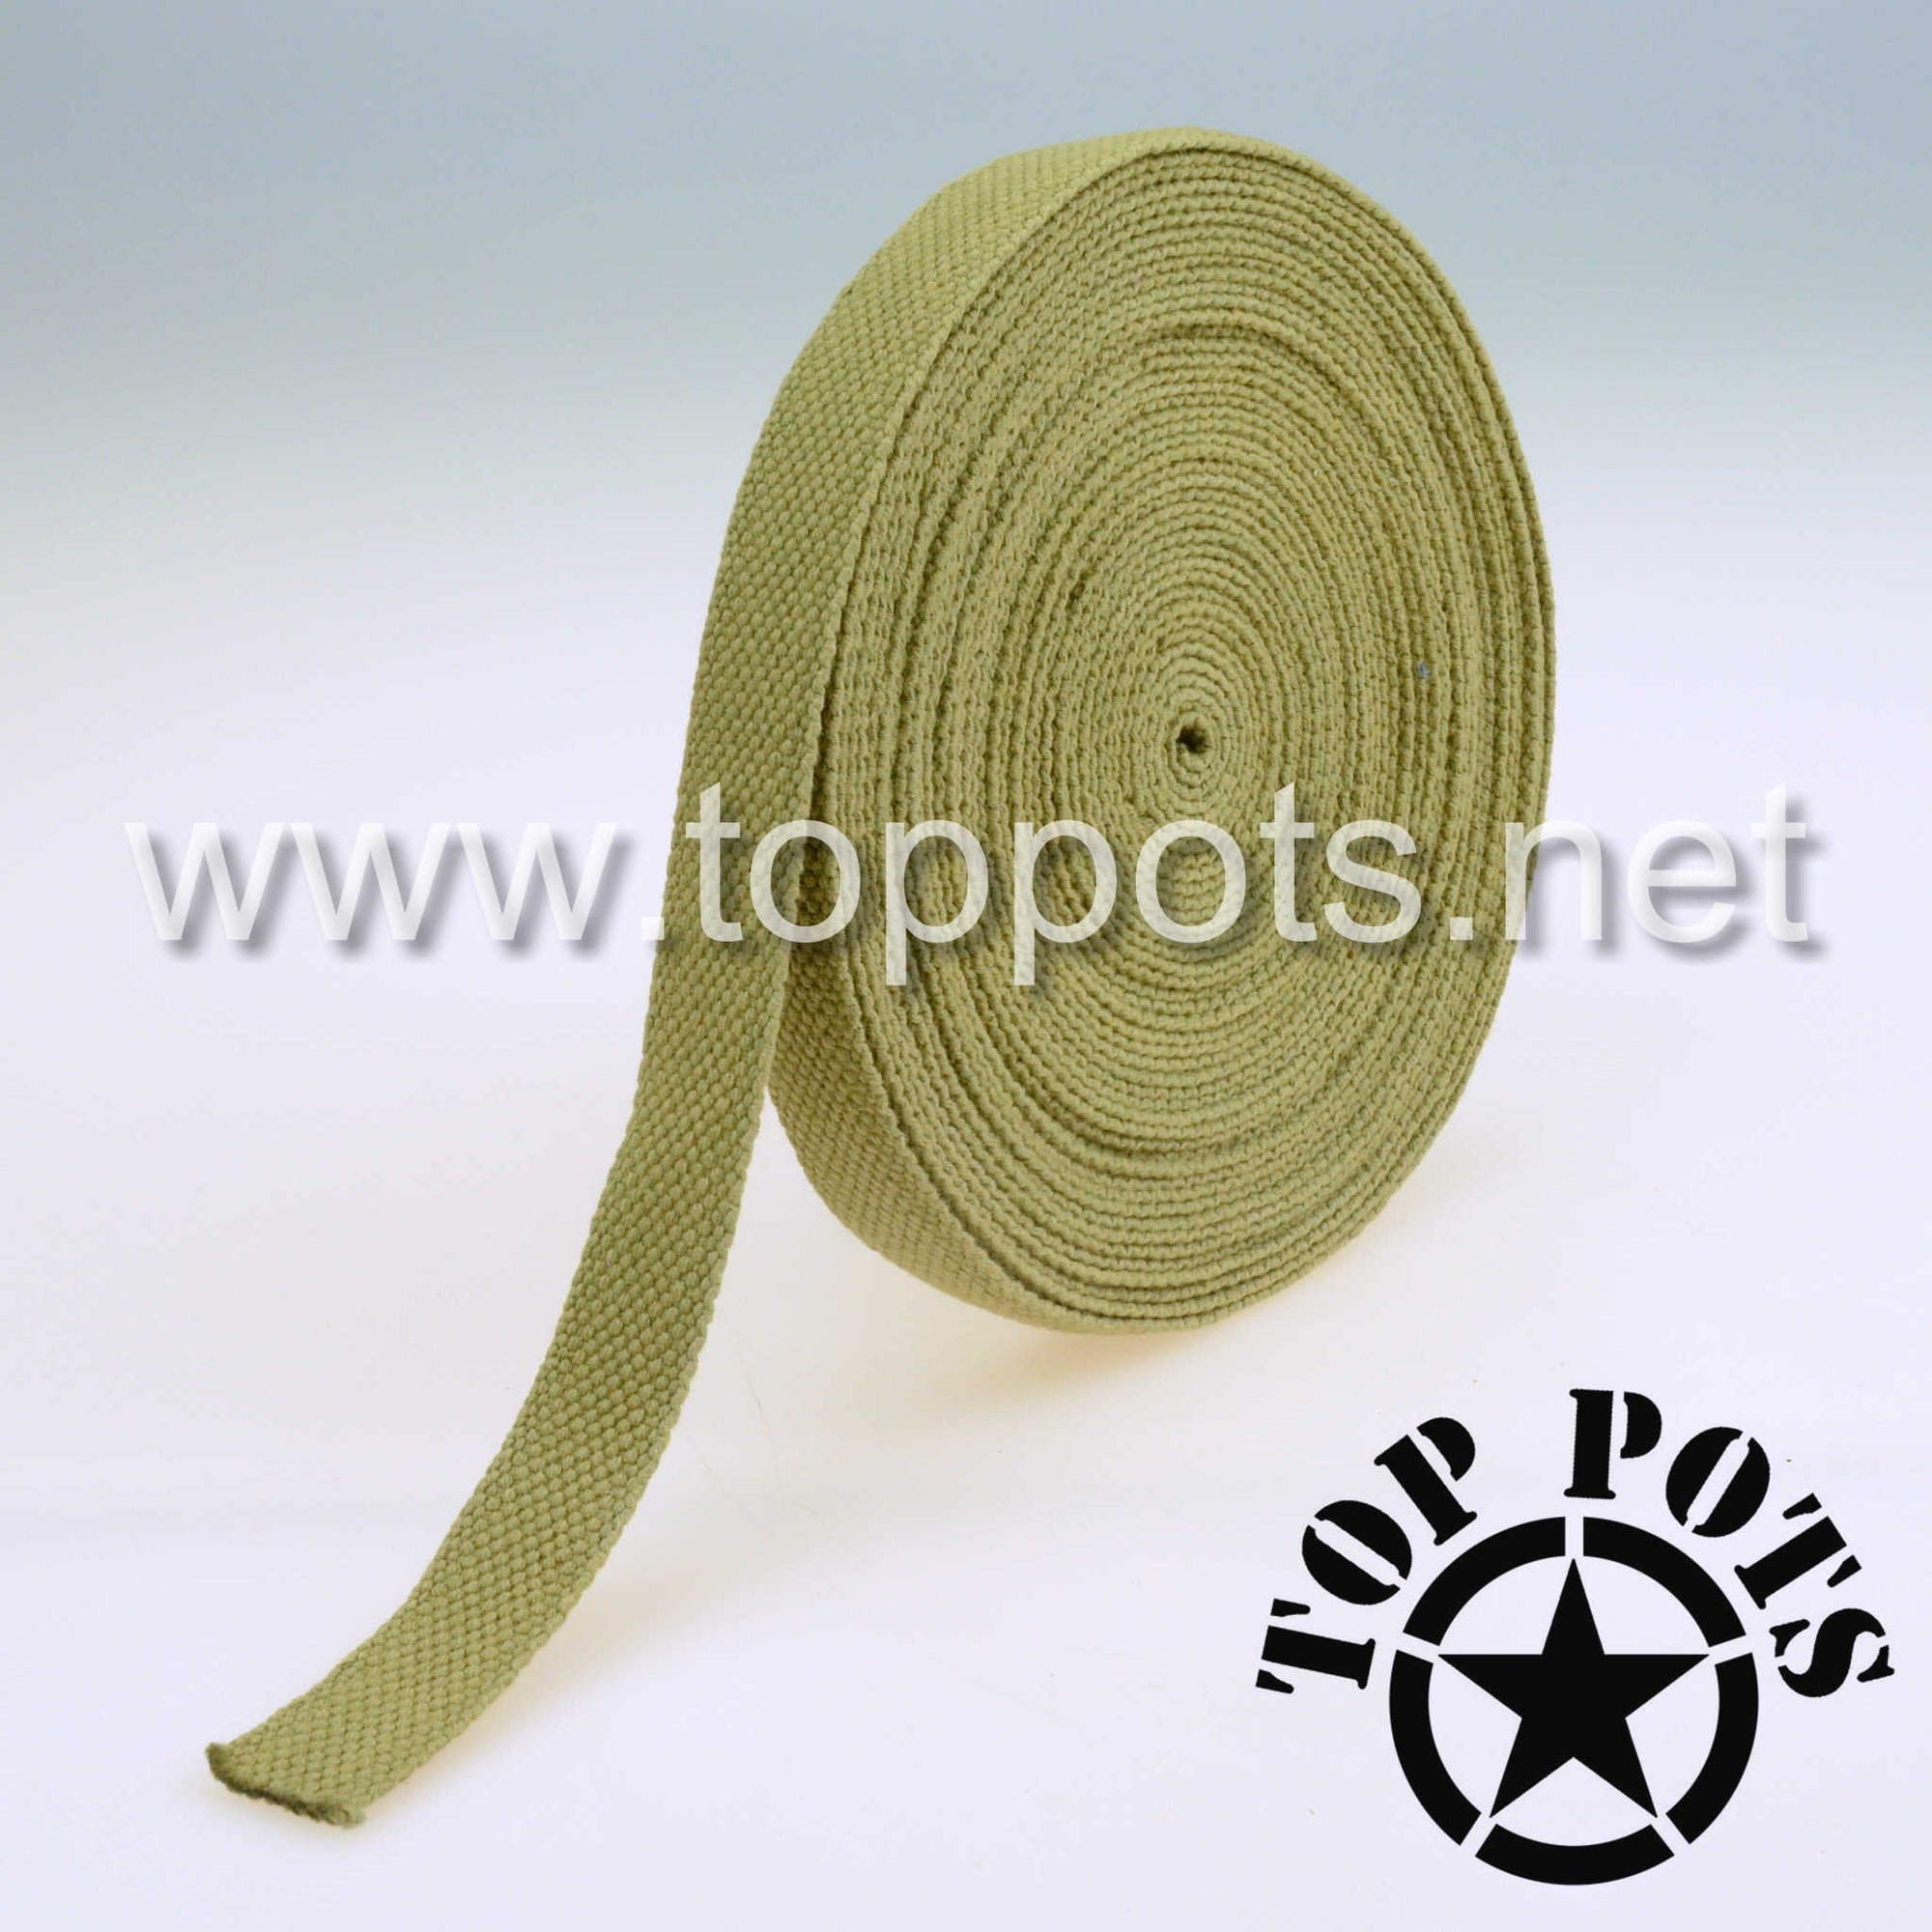 WWII US Army M1C Paratrooper Helmet Liner Cotton Olive Drab 3 A Strap Webbing - Shuttle Loom